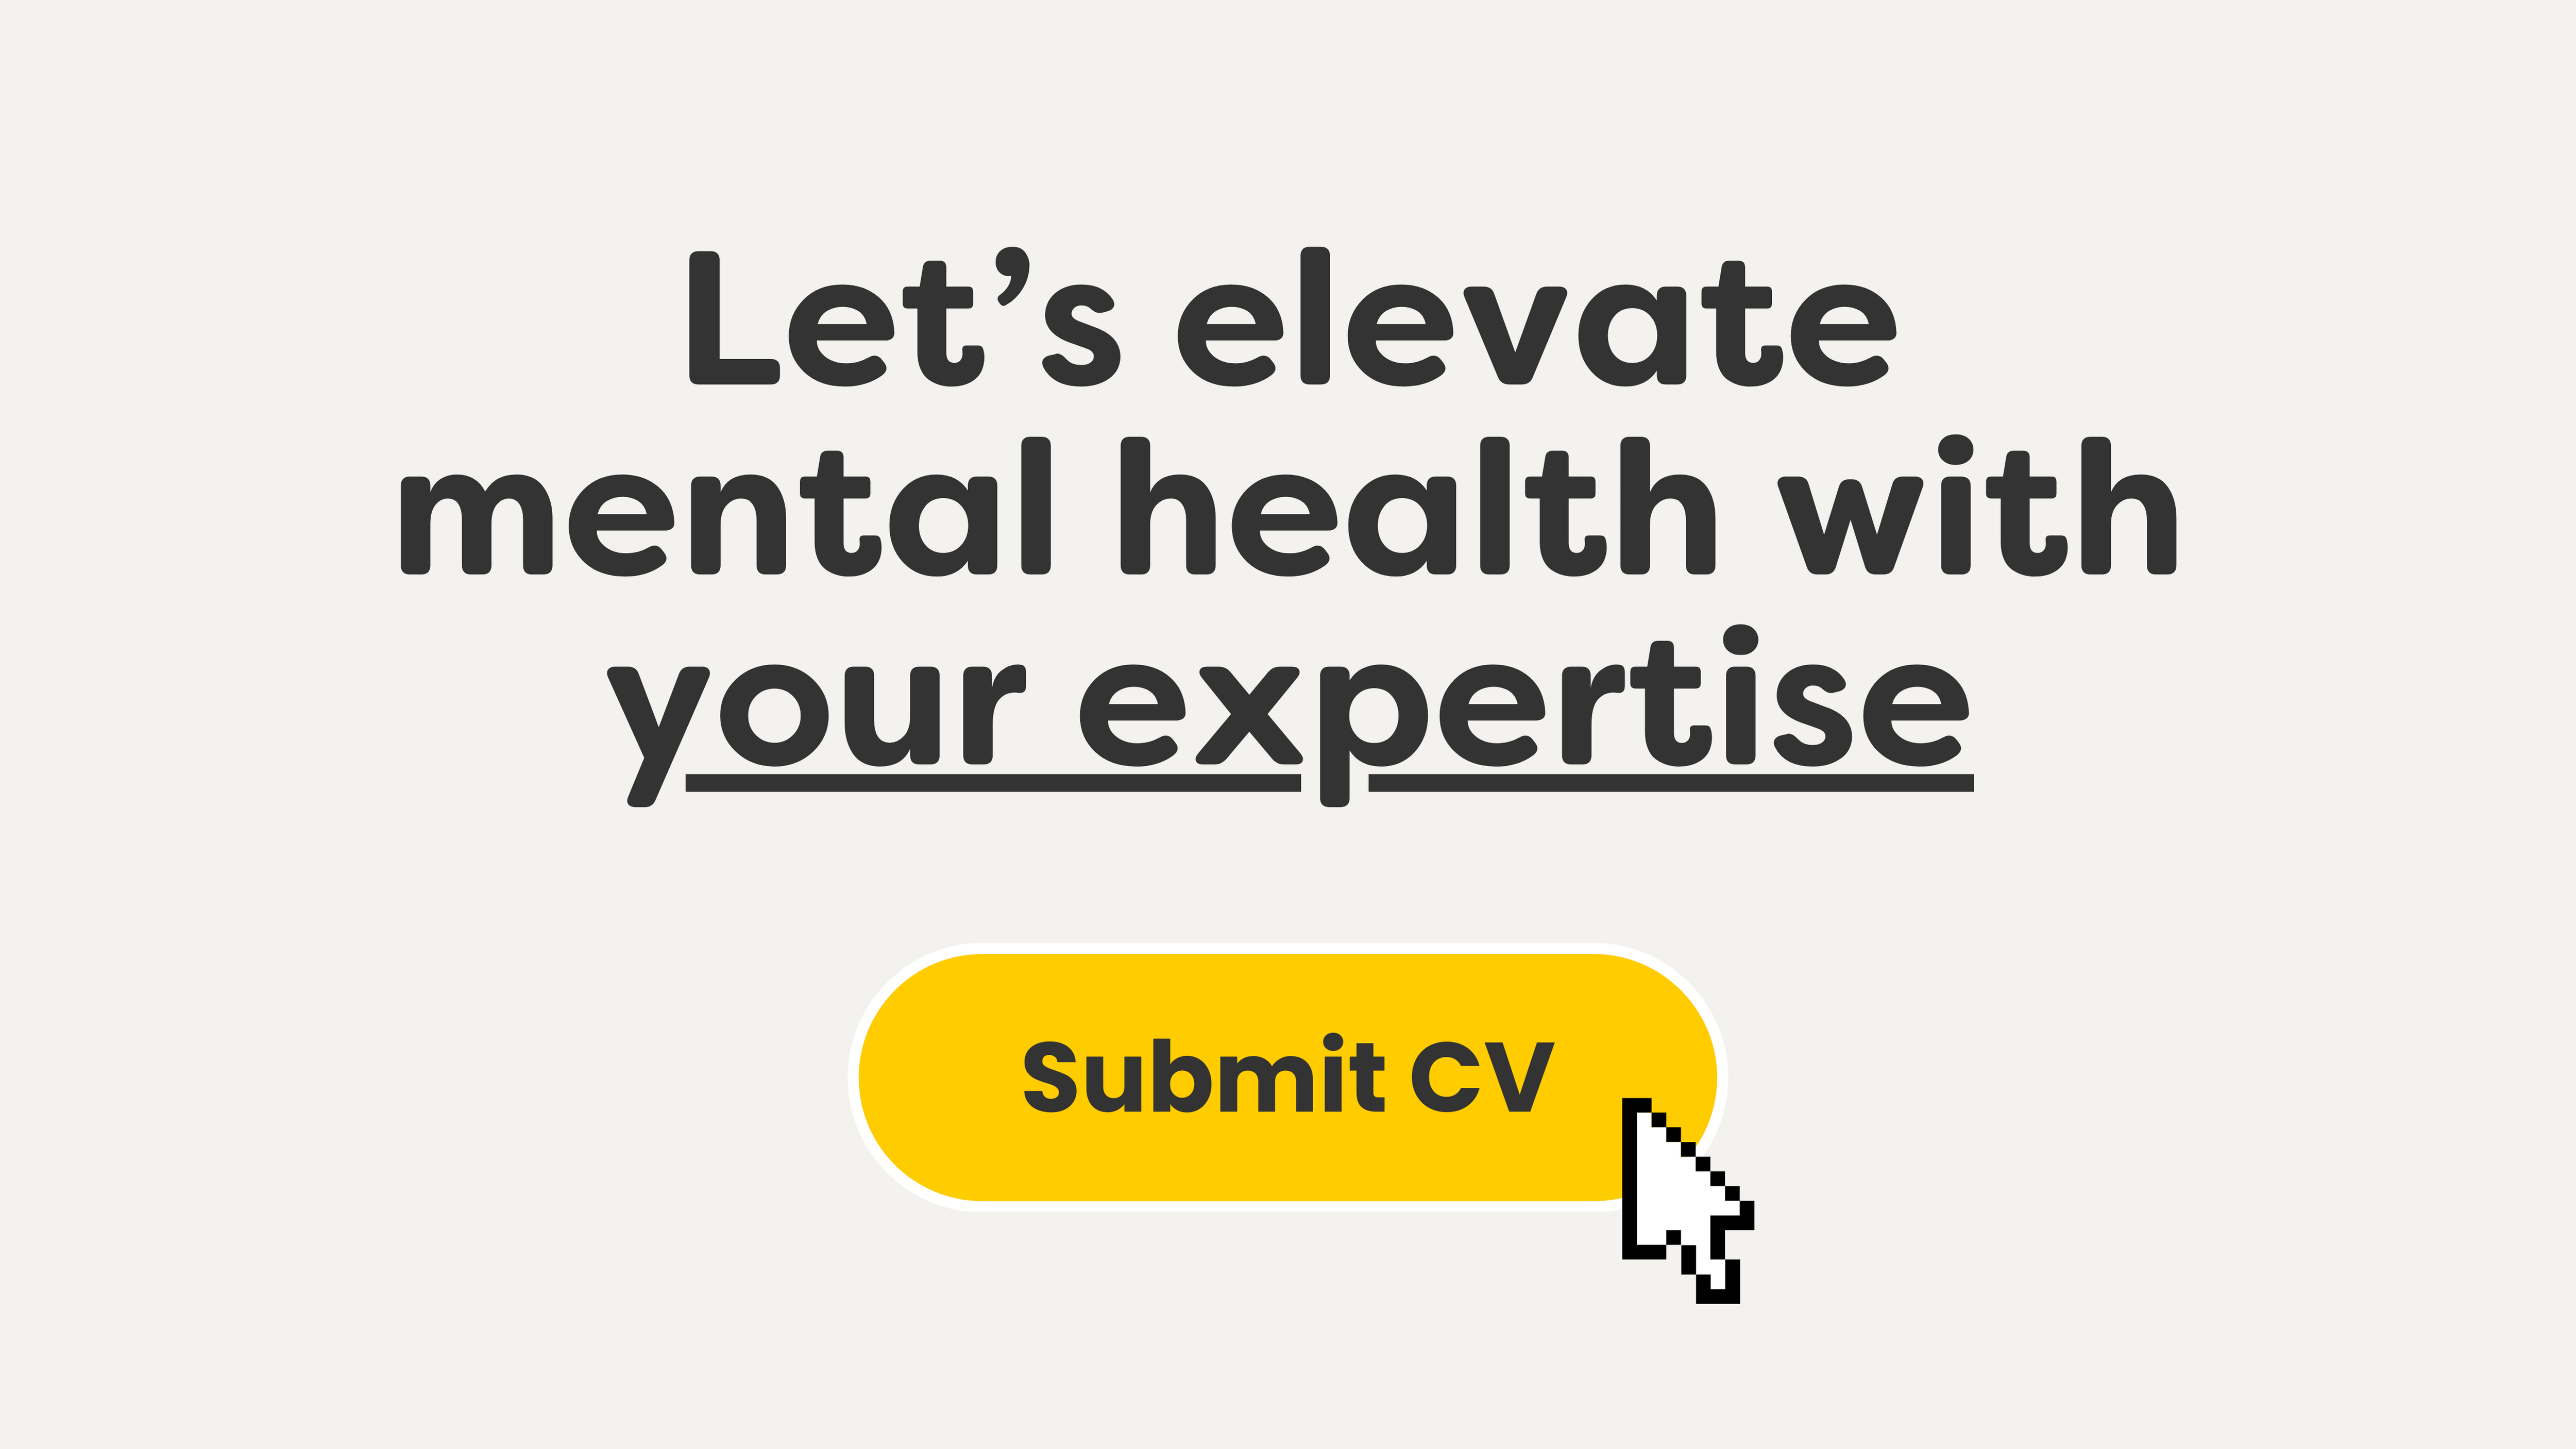 Let's elevate mental health with your expertise. Submit CV